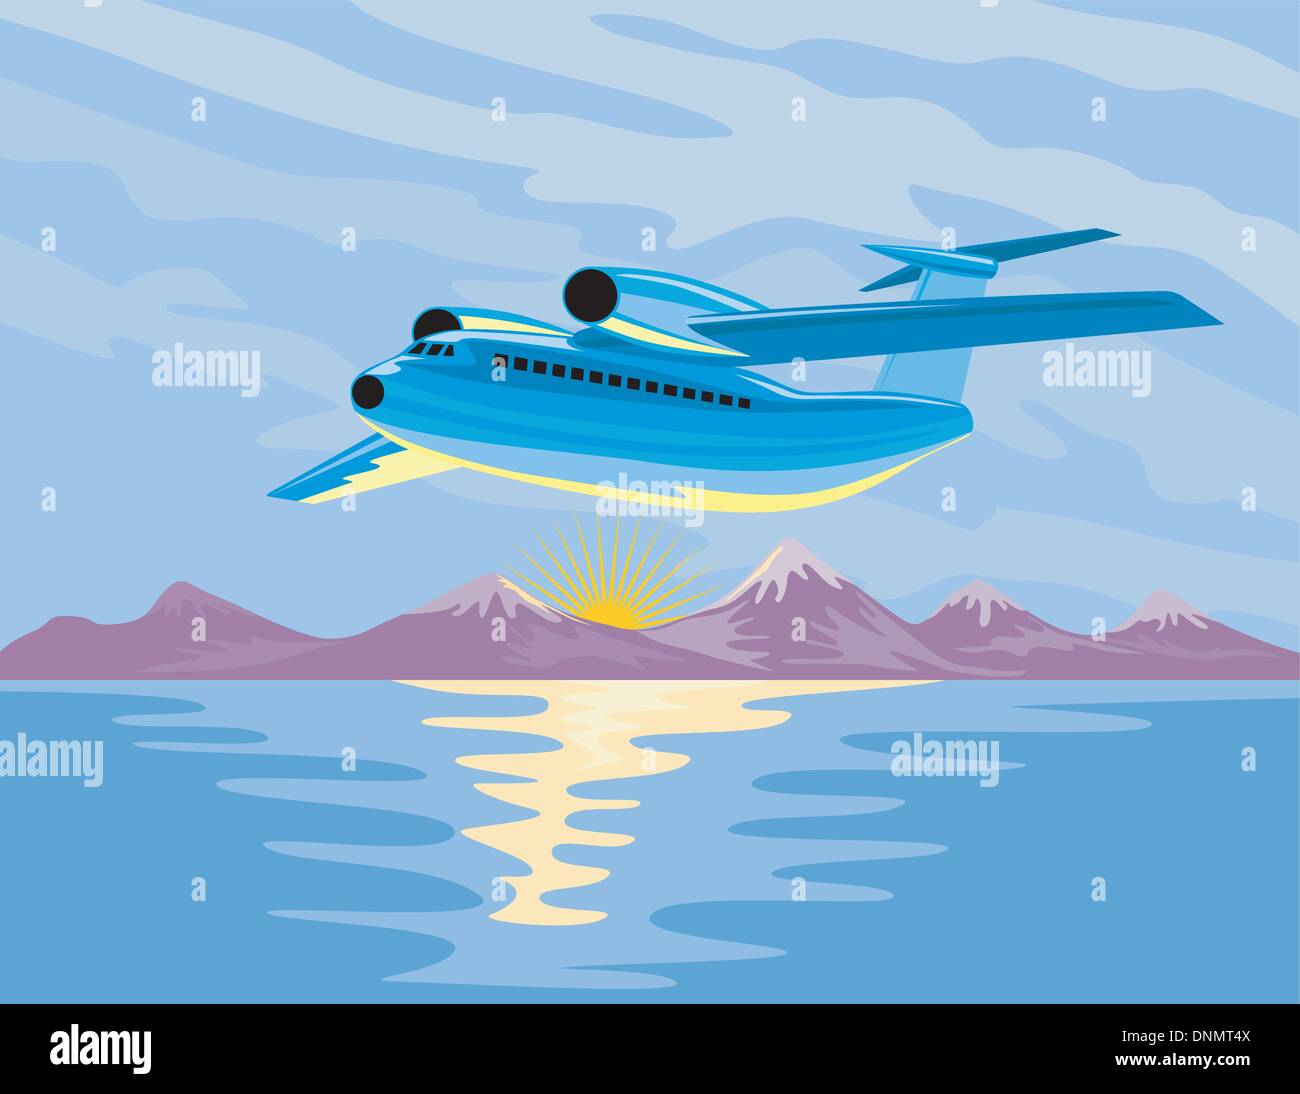 Illustration of a commercial jet plane airliner on isolated background Stock Vector